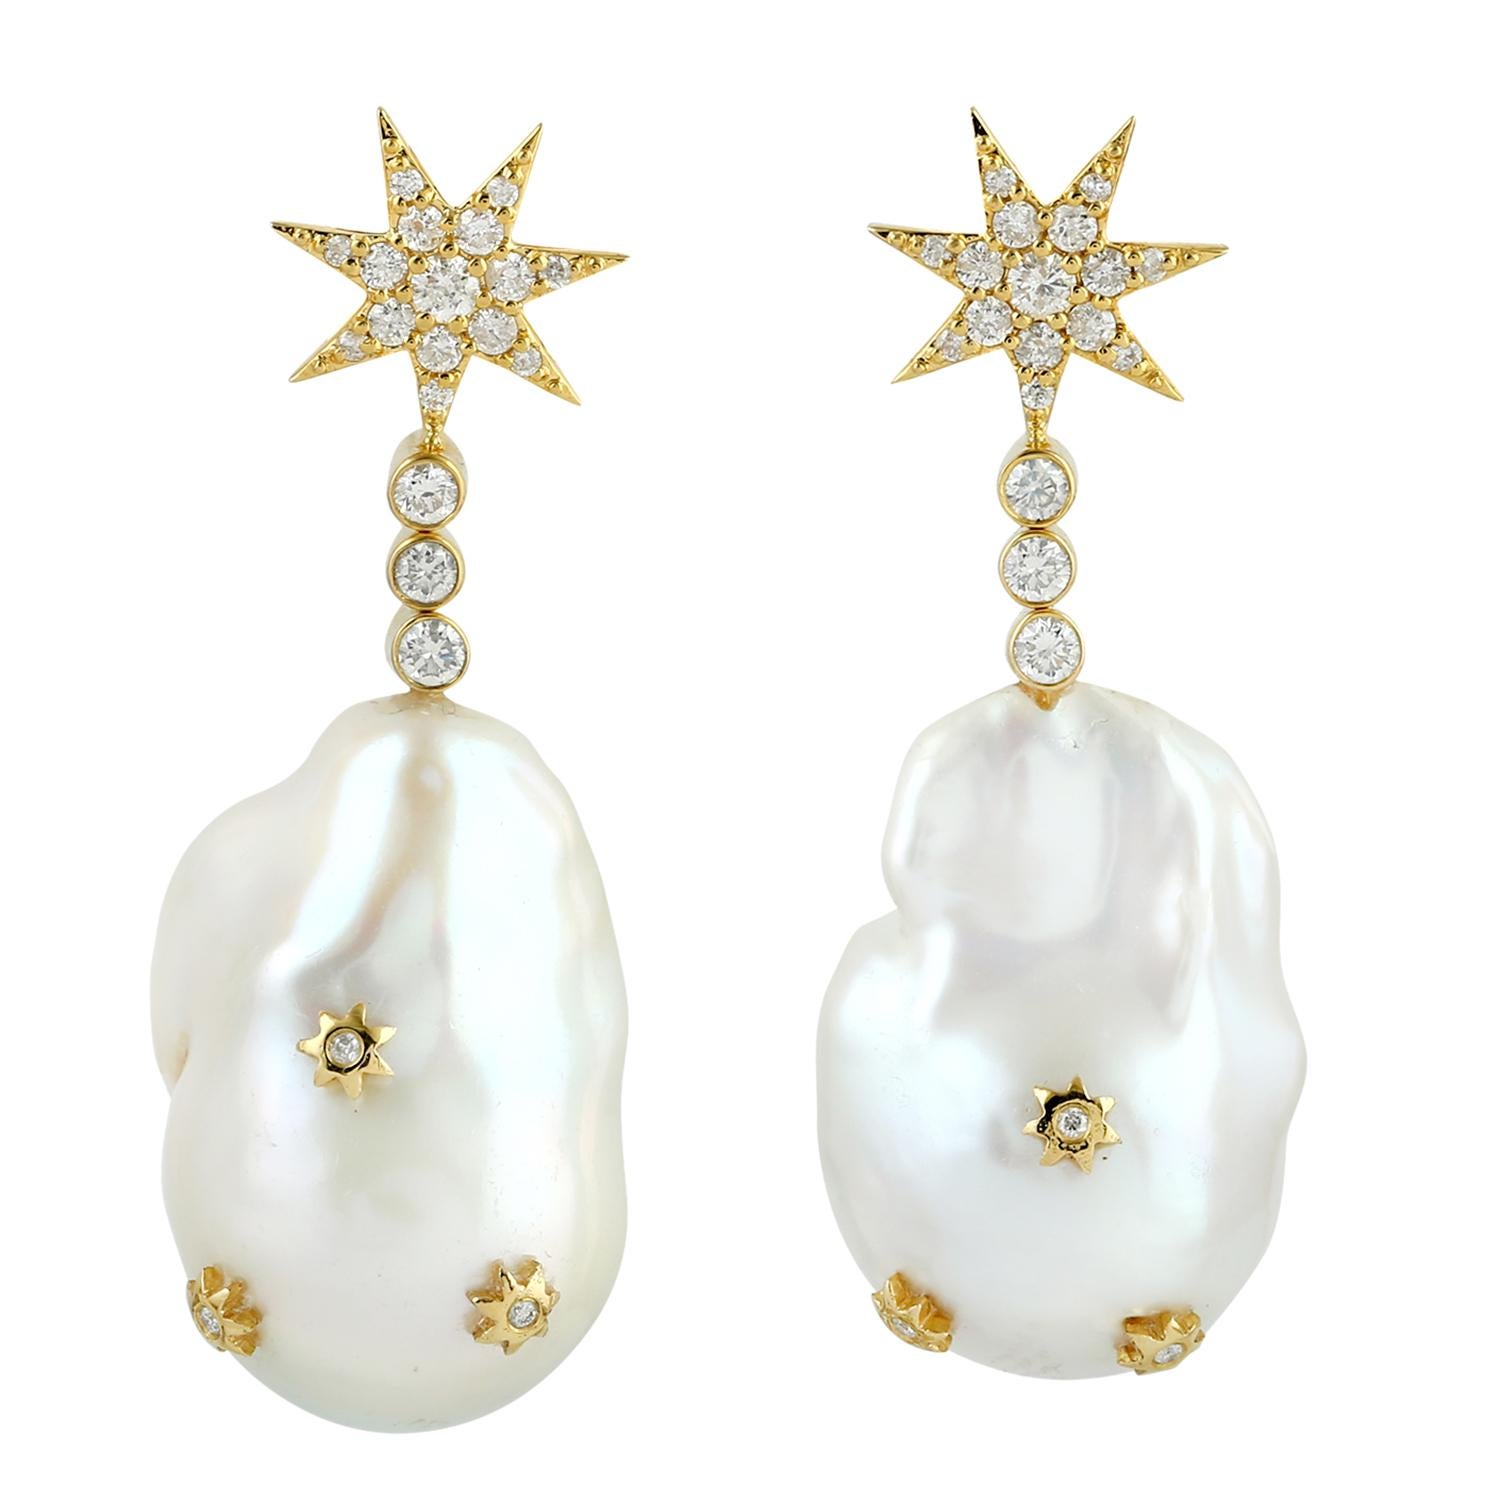 Mixed Cut Starburst Dangle Earrring With Baroque Pearl & Diamonds In 18k Yellow Gold For Sale